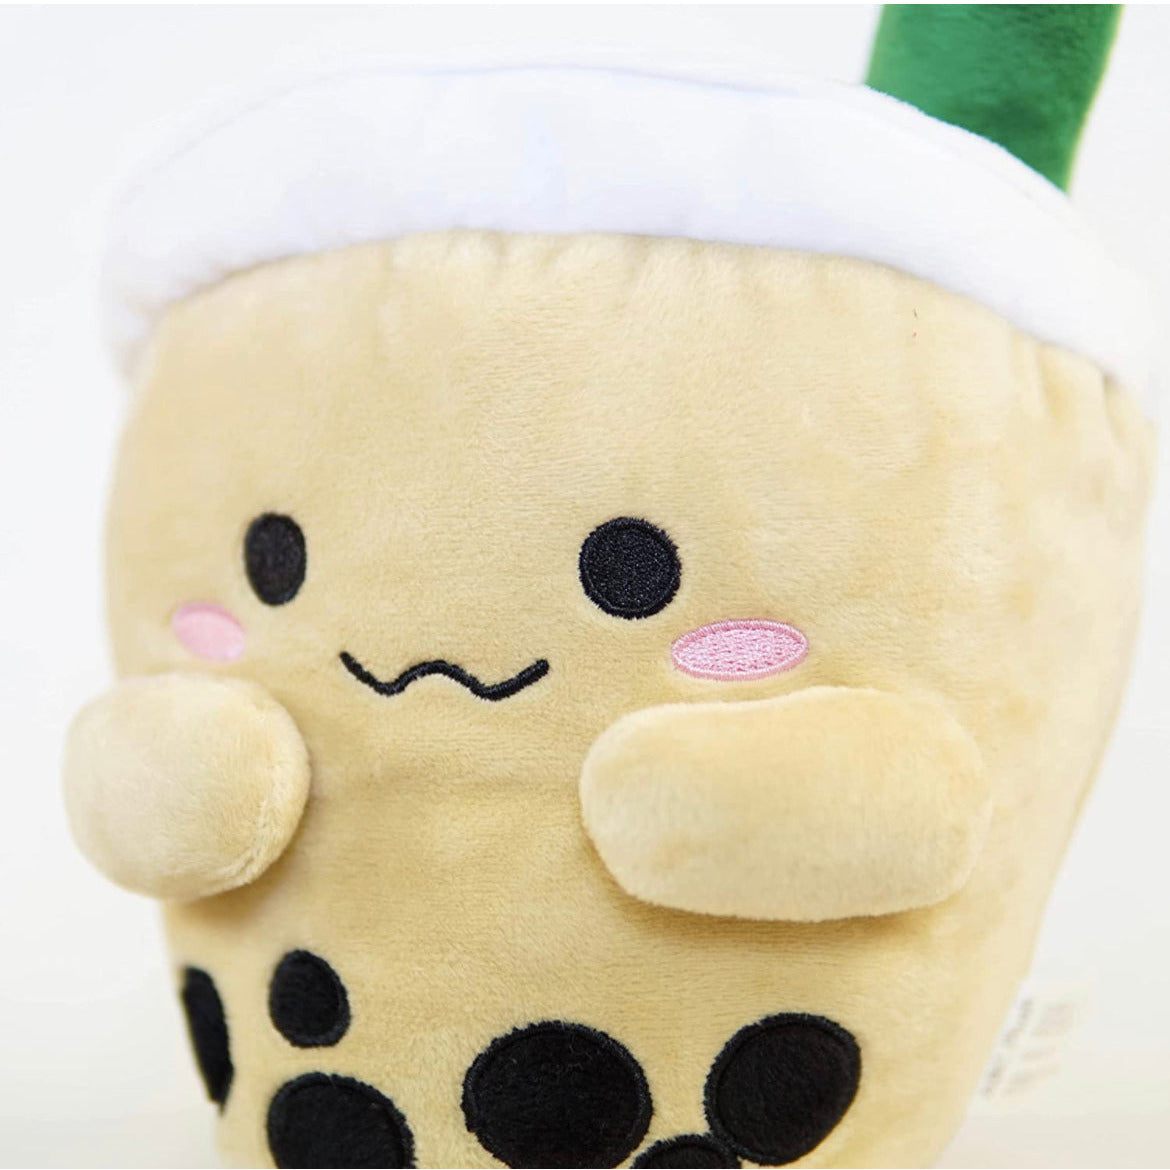 ABC Boba Tea Plush Orignial Cute Stuffed Animal Toy for Wallet, Backpack or Purse 5